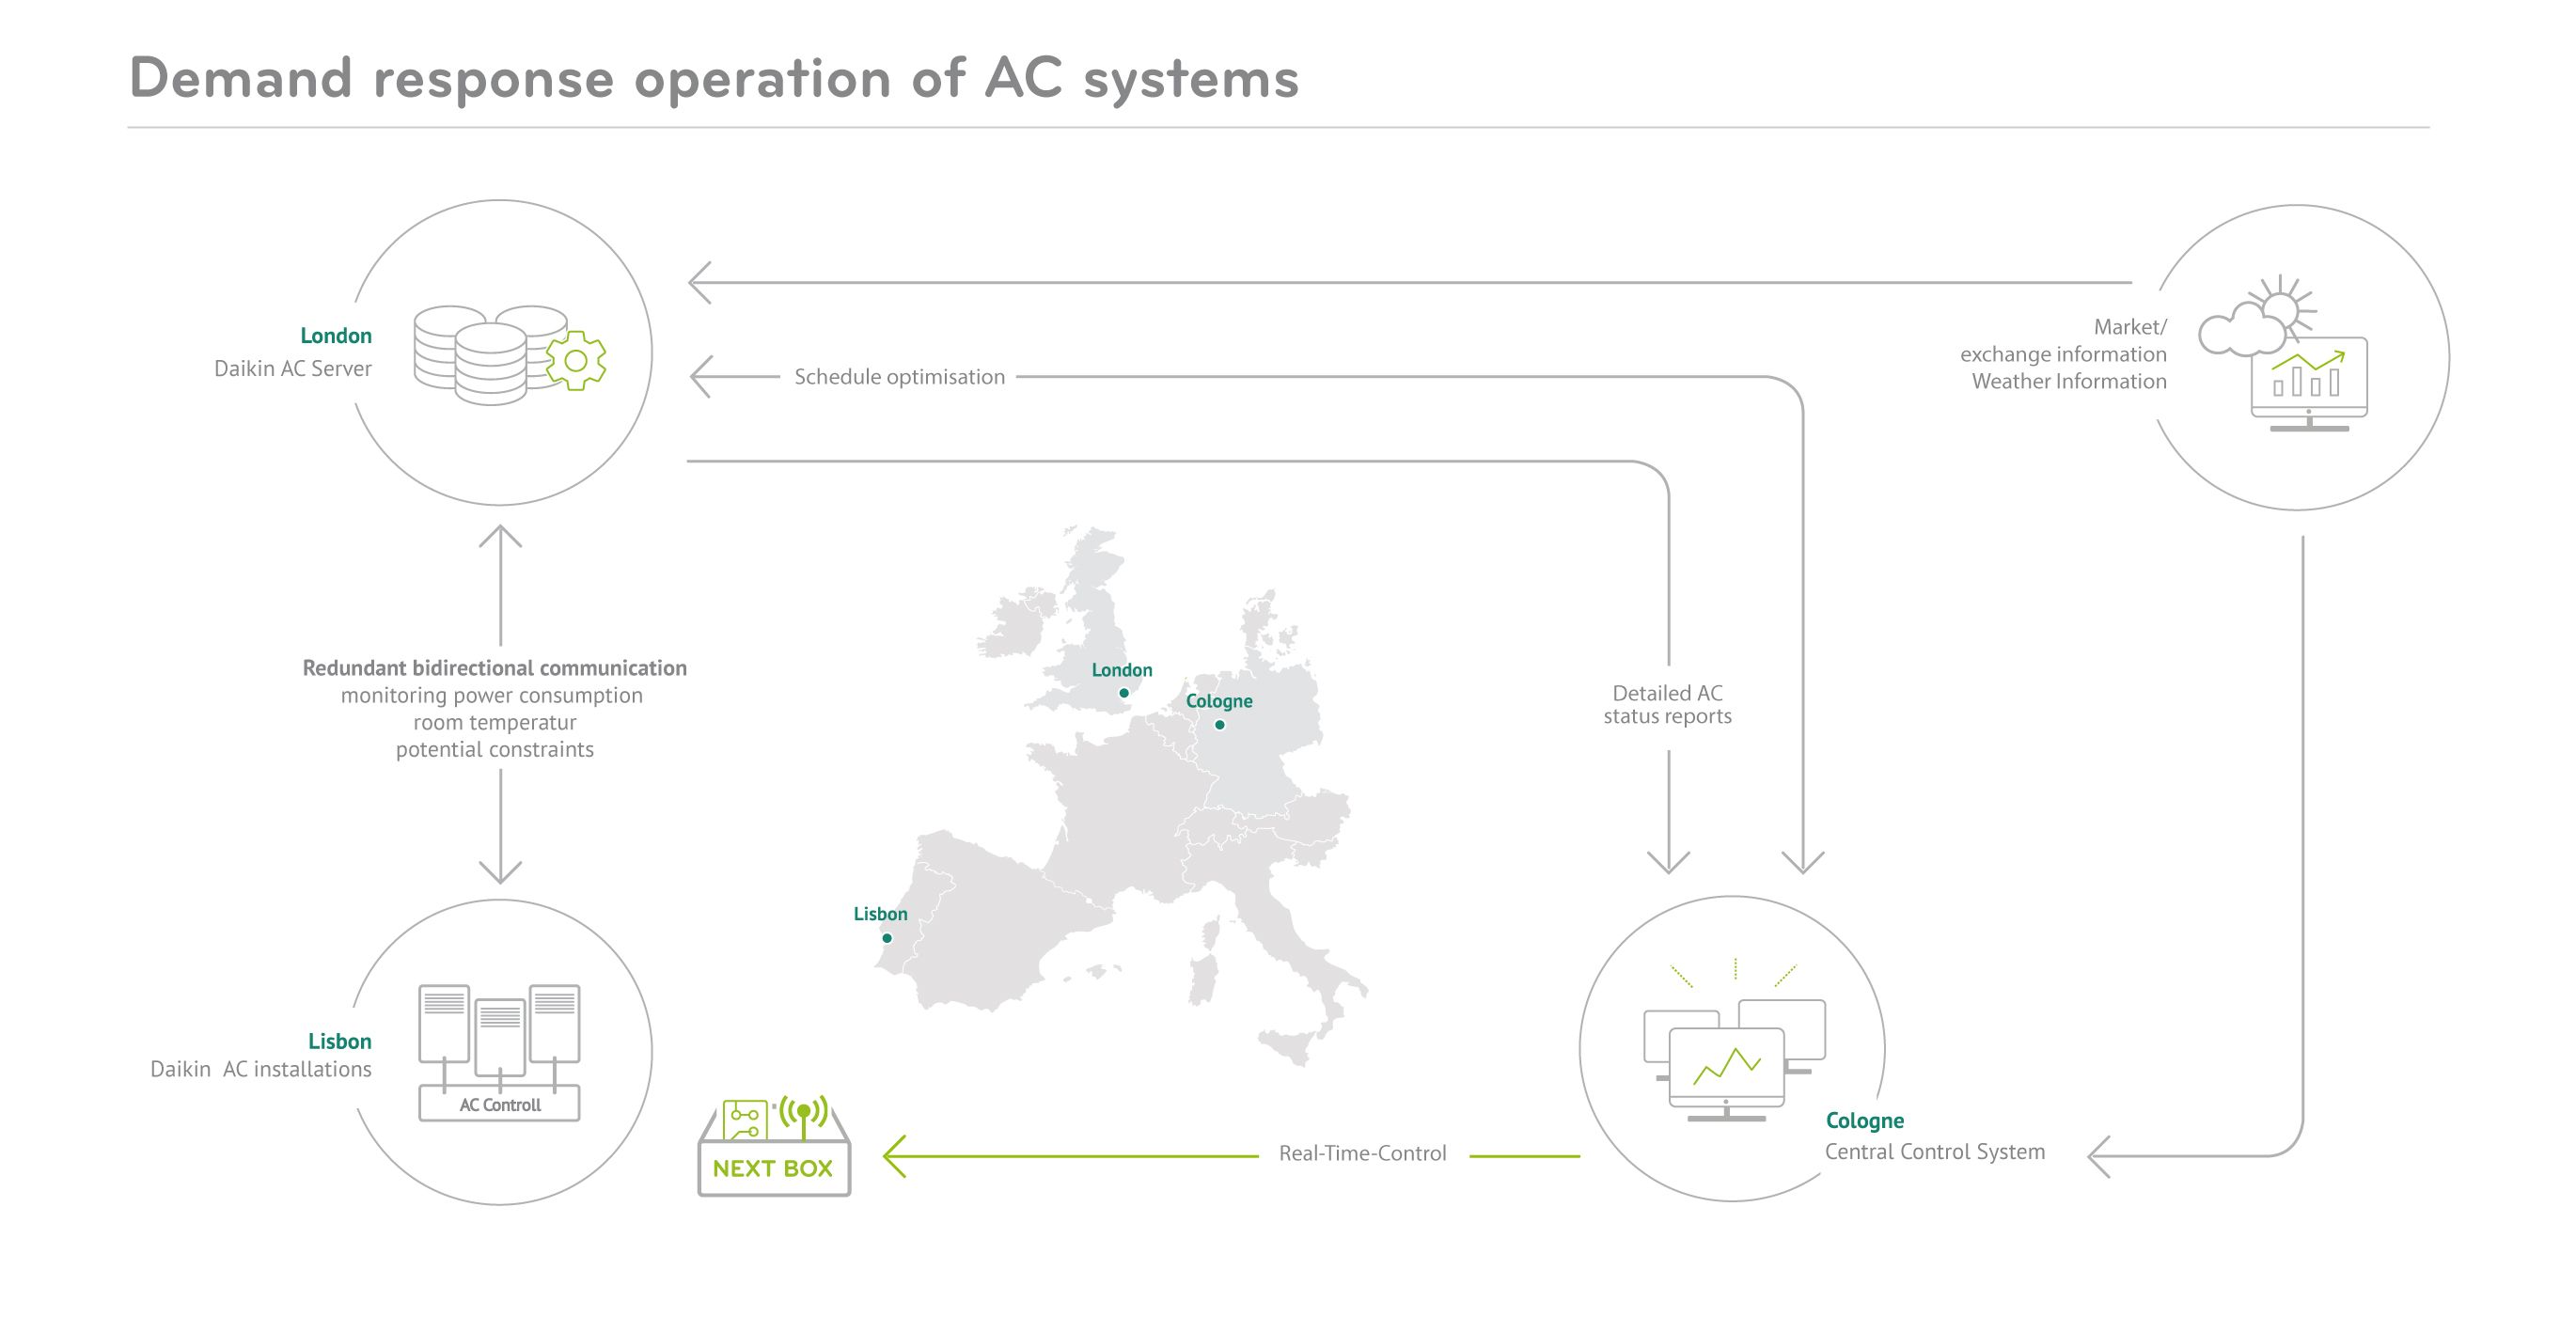 Demand response provision by AC systems explained.